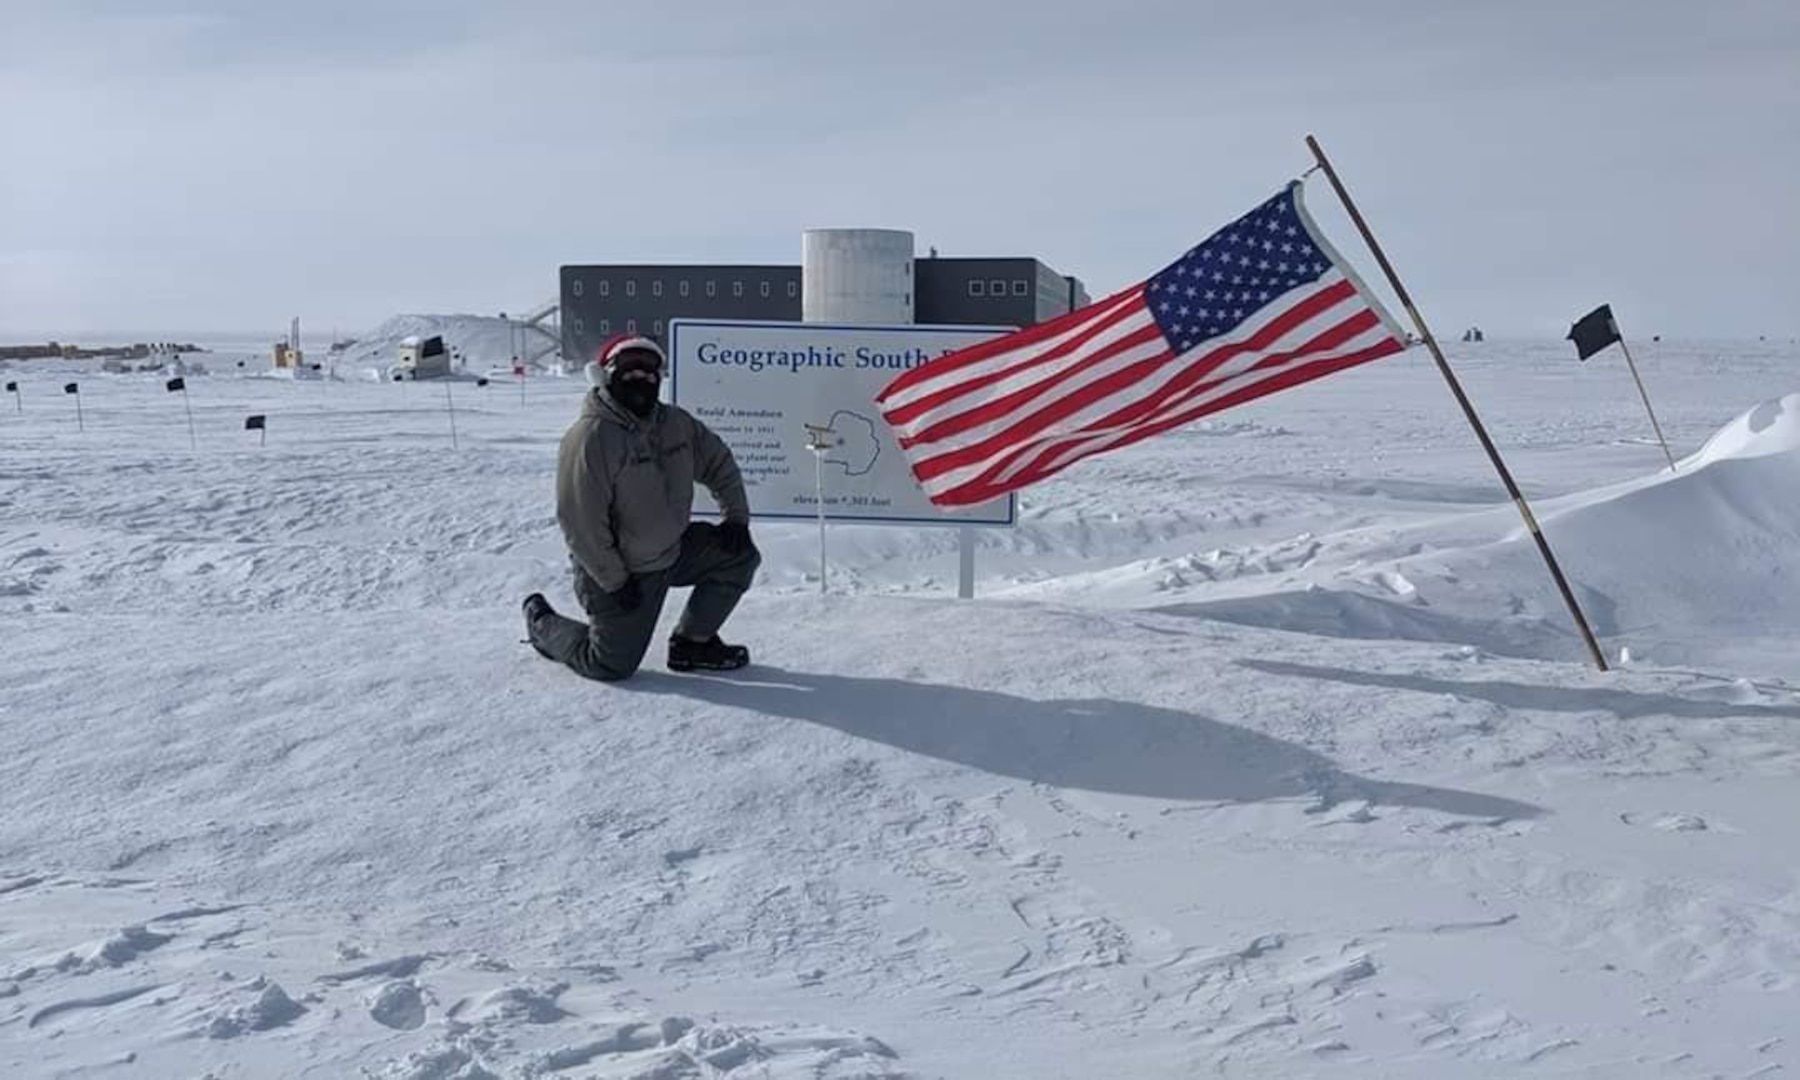 Airmen assigned to the 189th Maintenance Group, Arkansas National Guard, performed temporary duty in Antarctica in support of the 109th Airlift Wing, New York National Guard, and the Department of Defense's Operation Deep Freeze. The crew prepared and maintained the 109th AW's C-130J "Snowbirds" and assisted with supply transport and medical evacuation readiness.